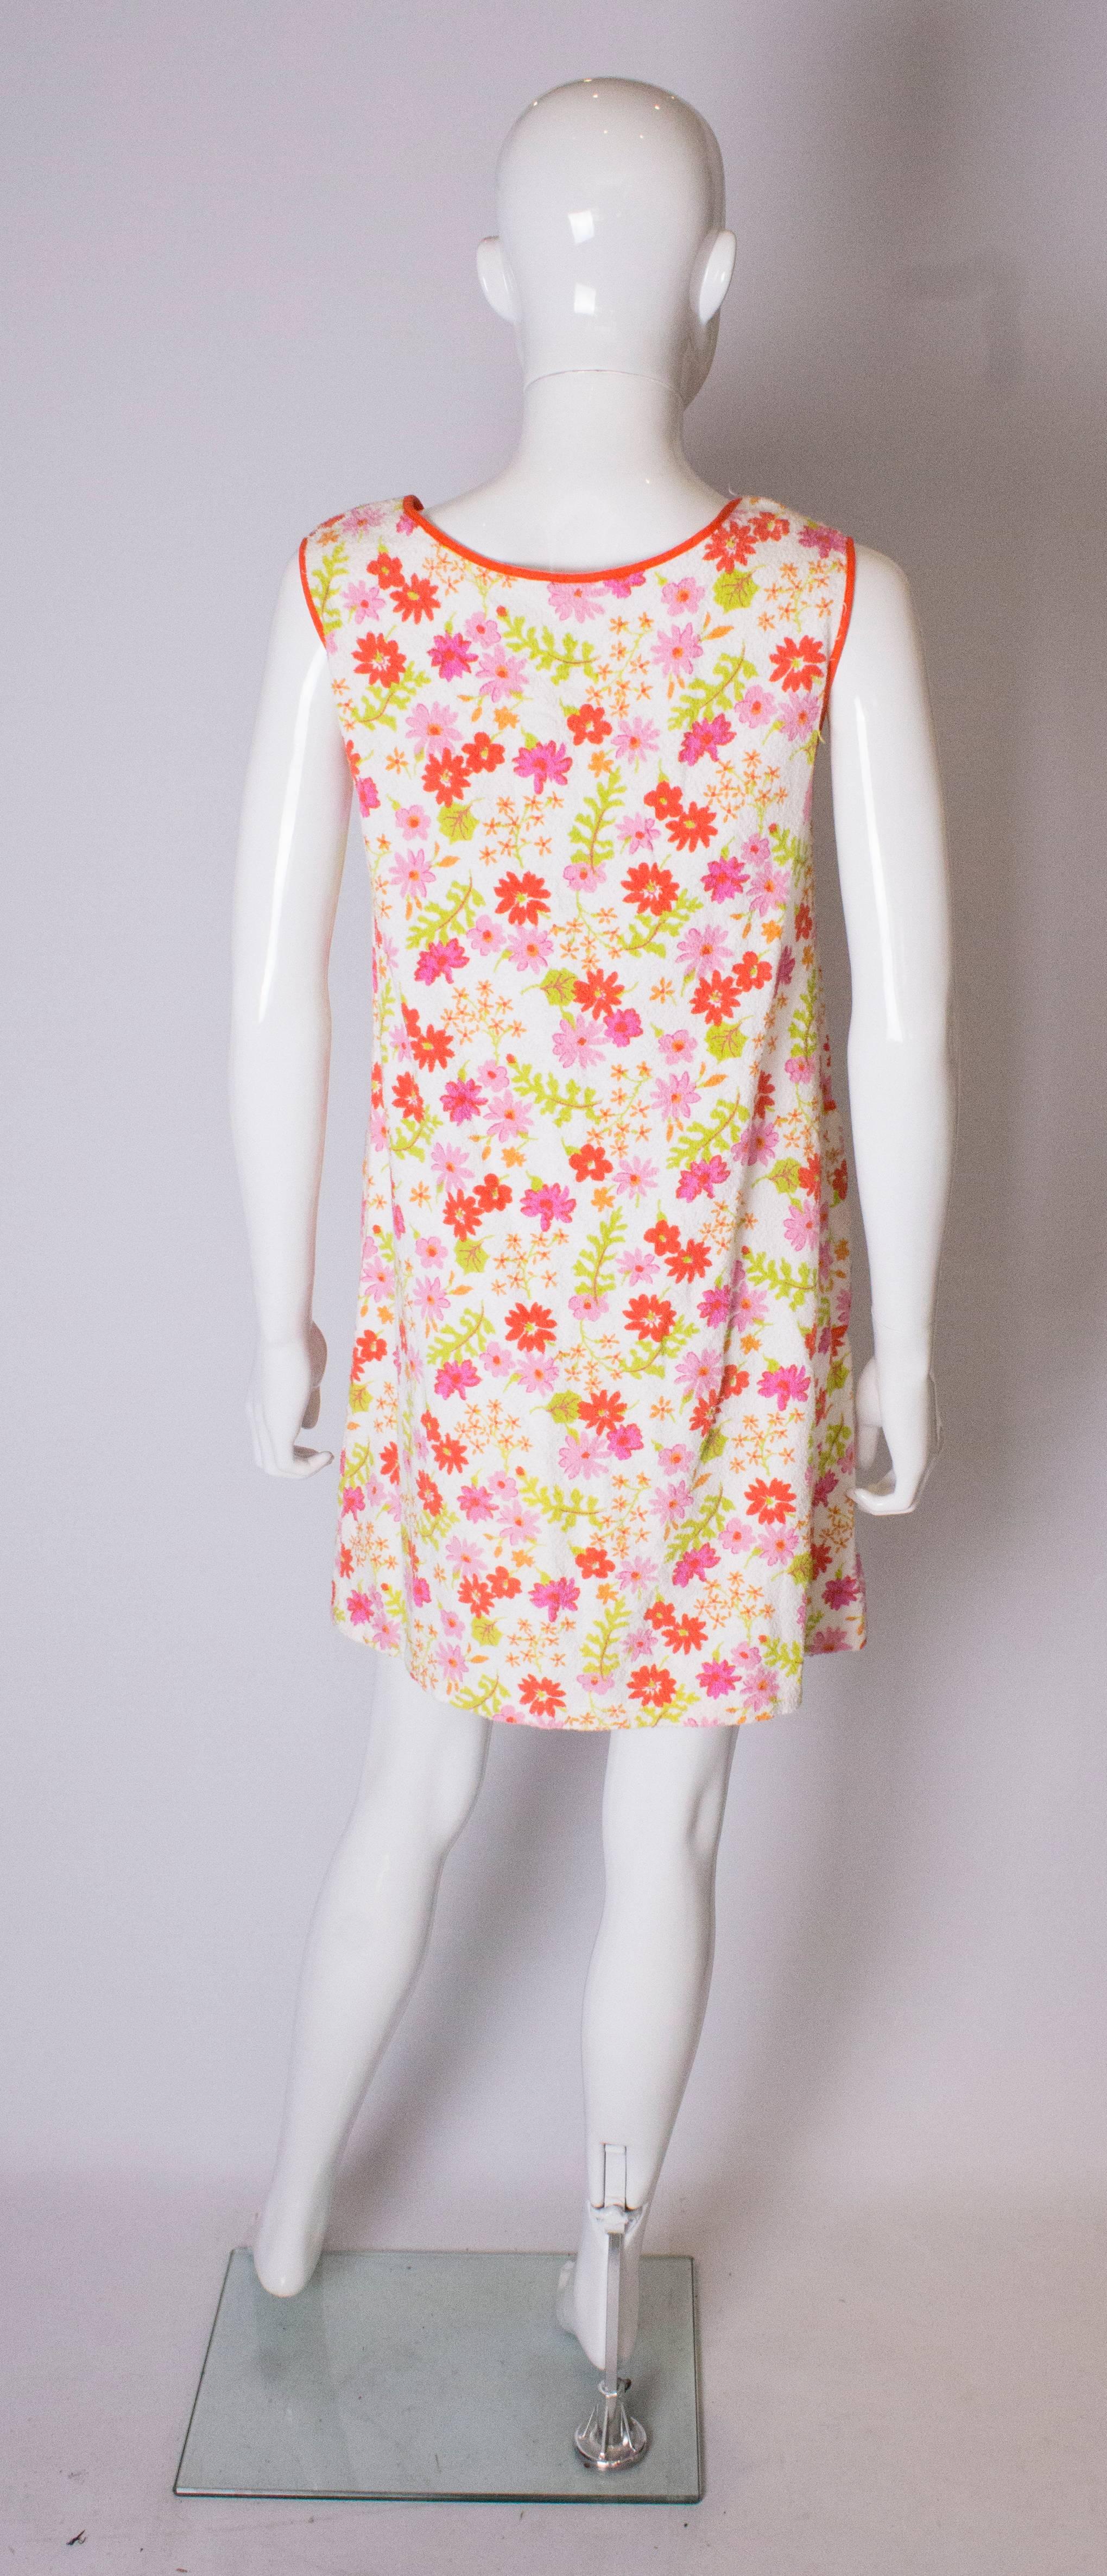 Women's A Vintage 1960s floral printed  beach dress /cover up For Sale